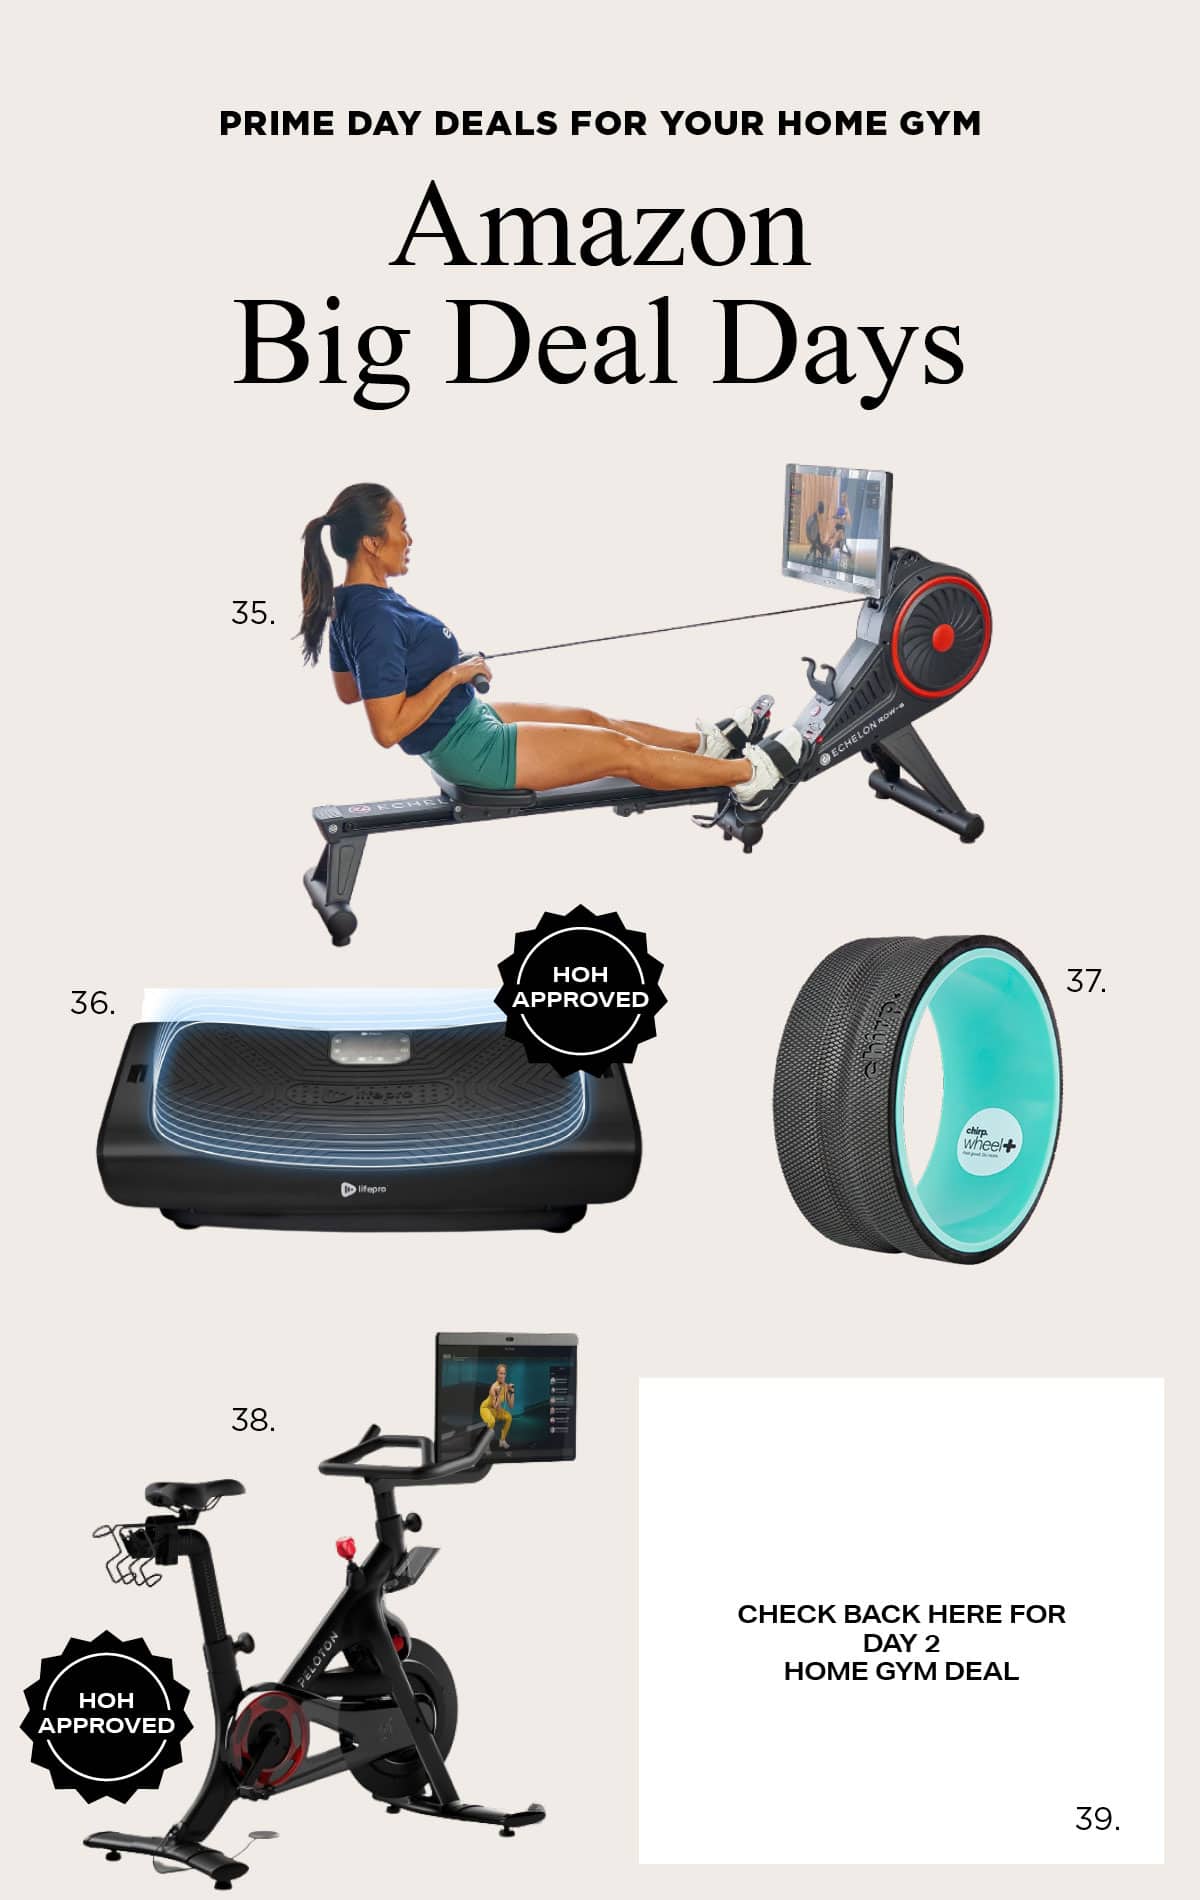 Best Home Gym and Workout Gear - Amazon Prime Big Deal Days - The Peloton bike is finally in the Amazon Prime Big Deal Days! Check out out all these home gym items and workout gear!